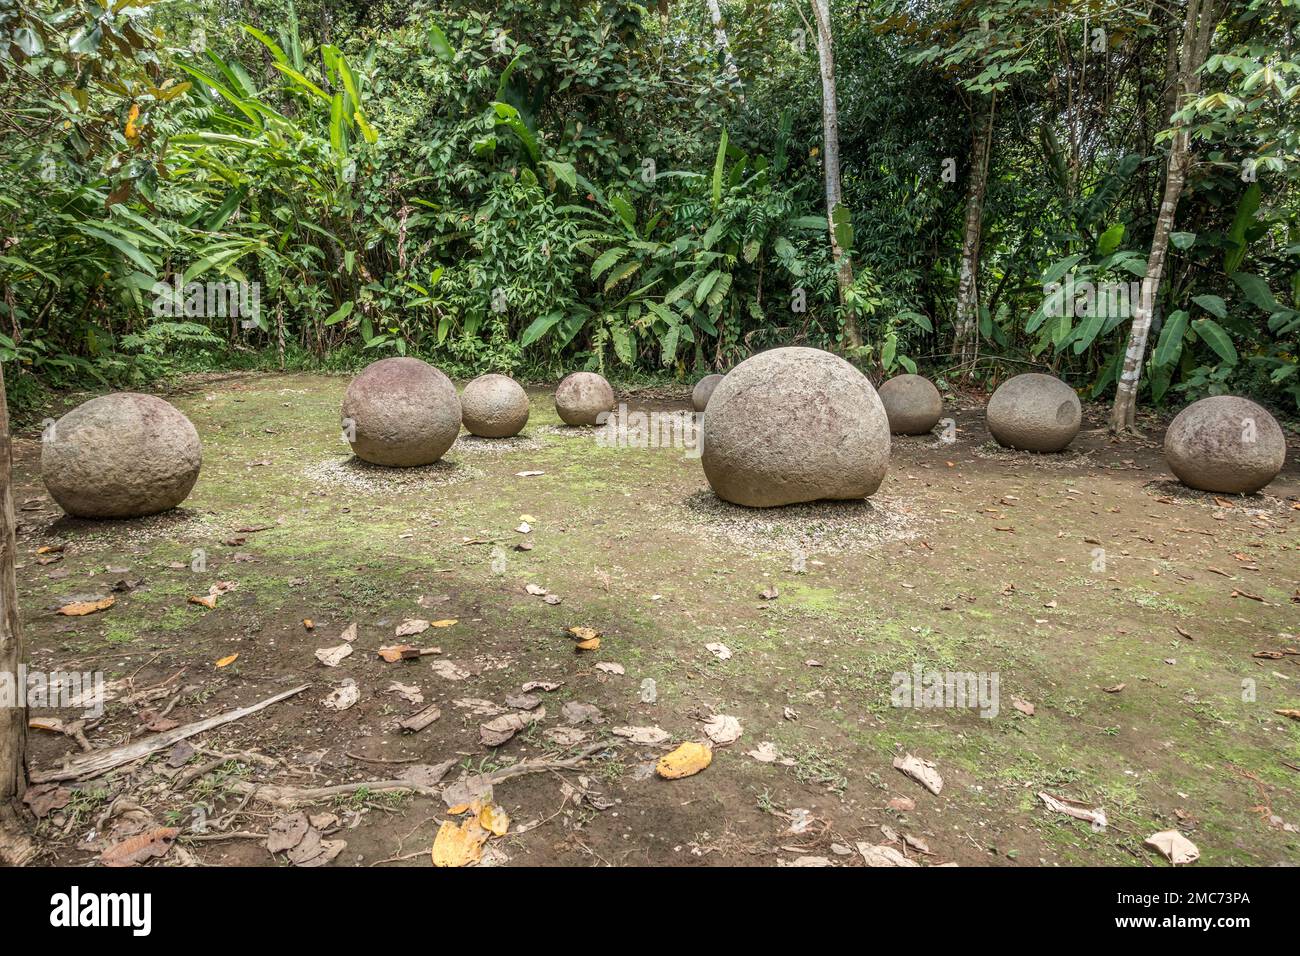 Group of ancient stone spheres at UNESCO World Heritage Site of Finca 6 near Palmar Sur, Costa Rica. Stock Photo